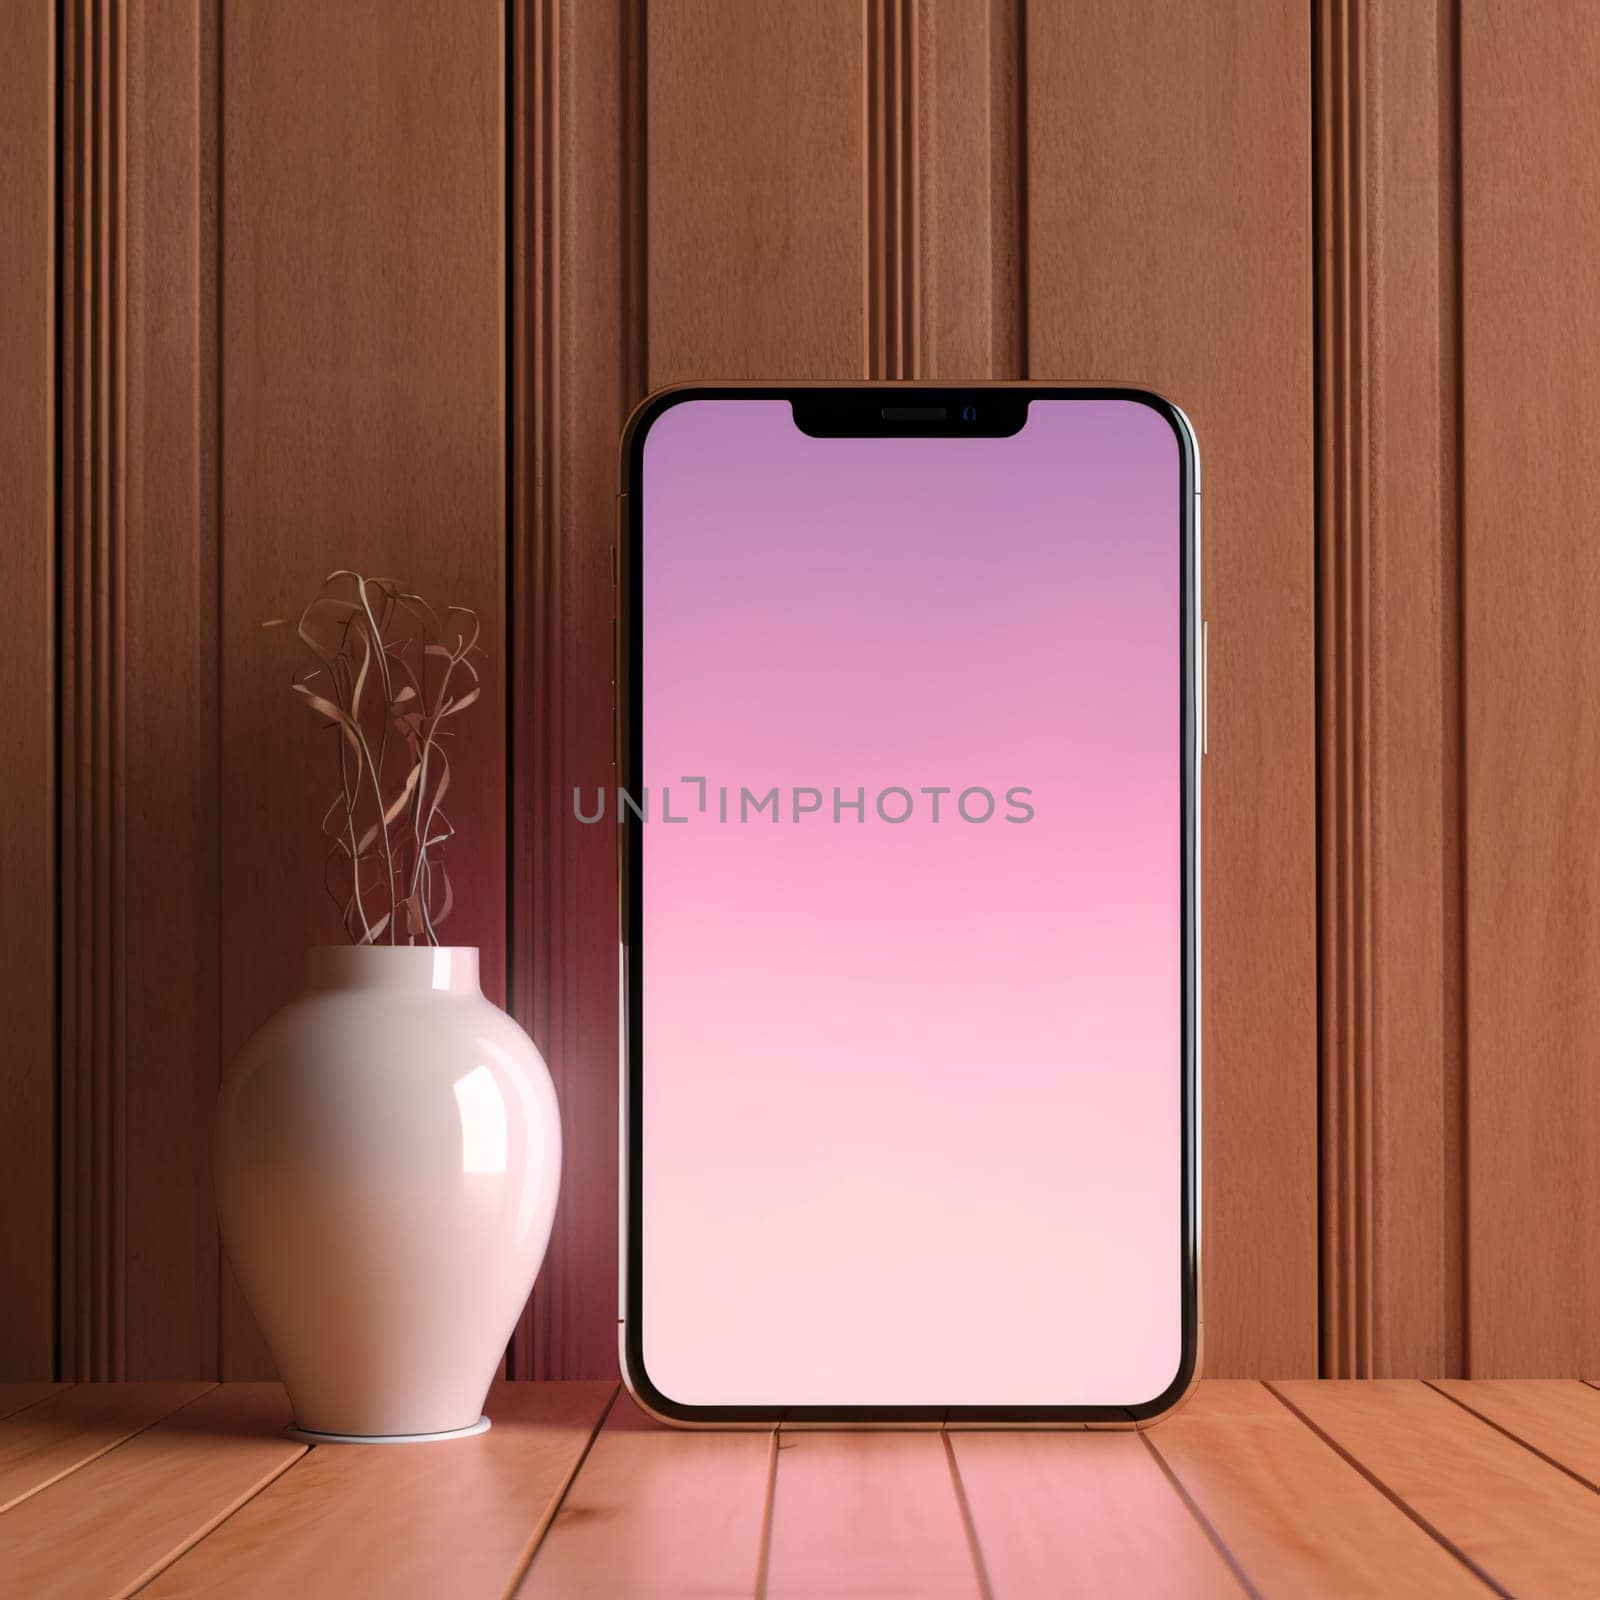 Smartphone screen: Smartphone with pink screen and vase on wooden background. 3D rendering.